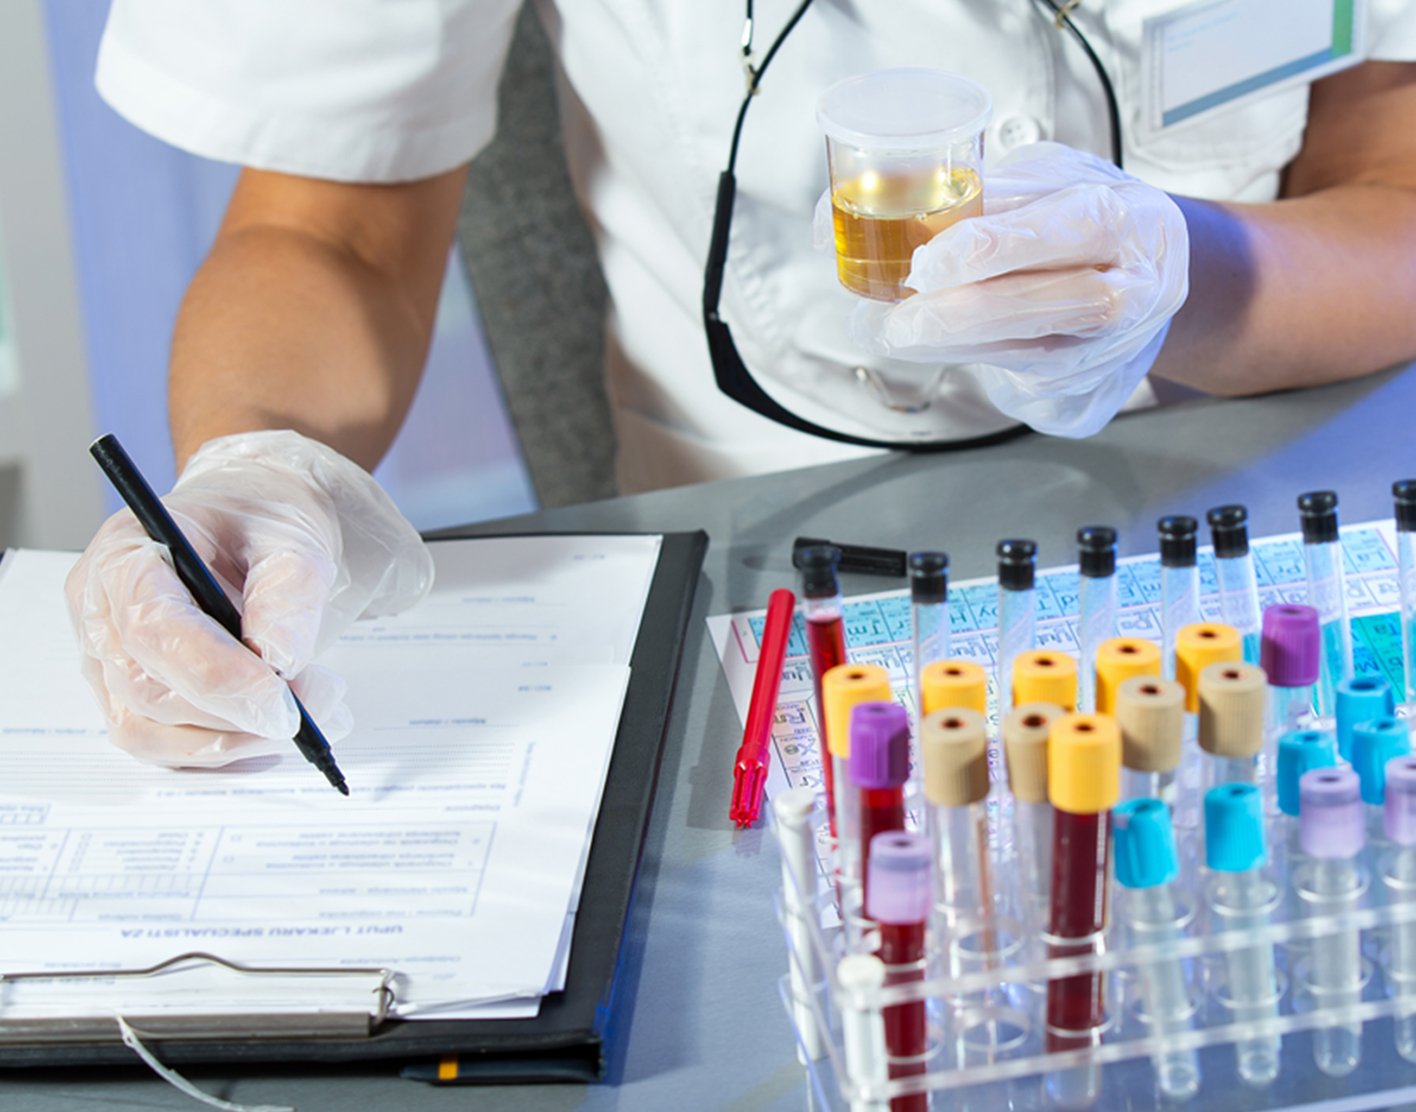 How To Interpret Your Cortisol Urine Test Results